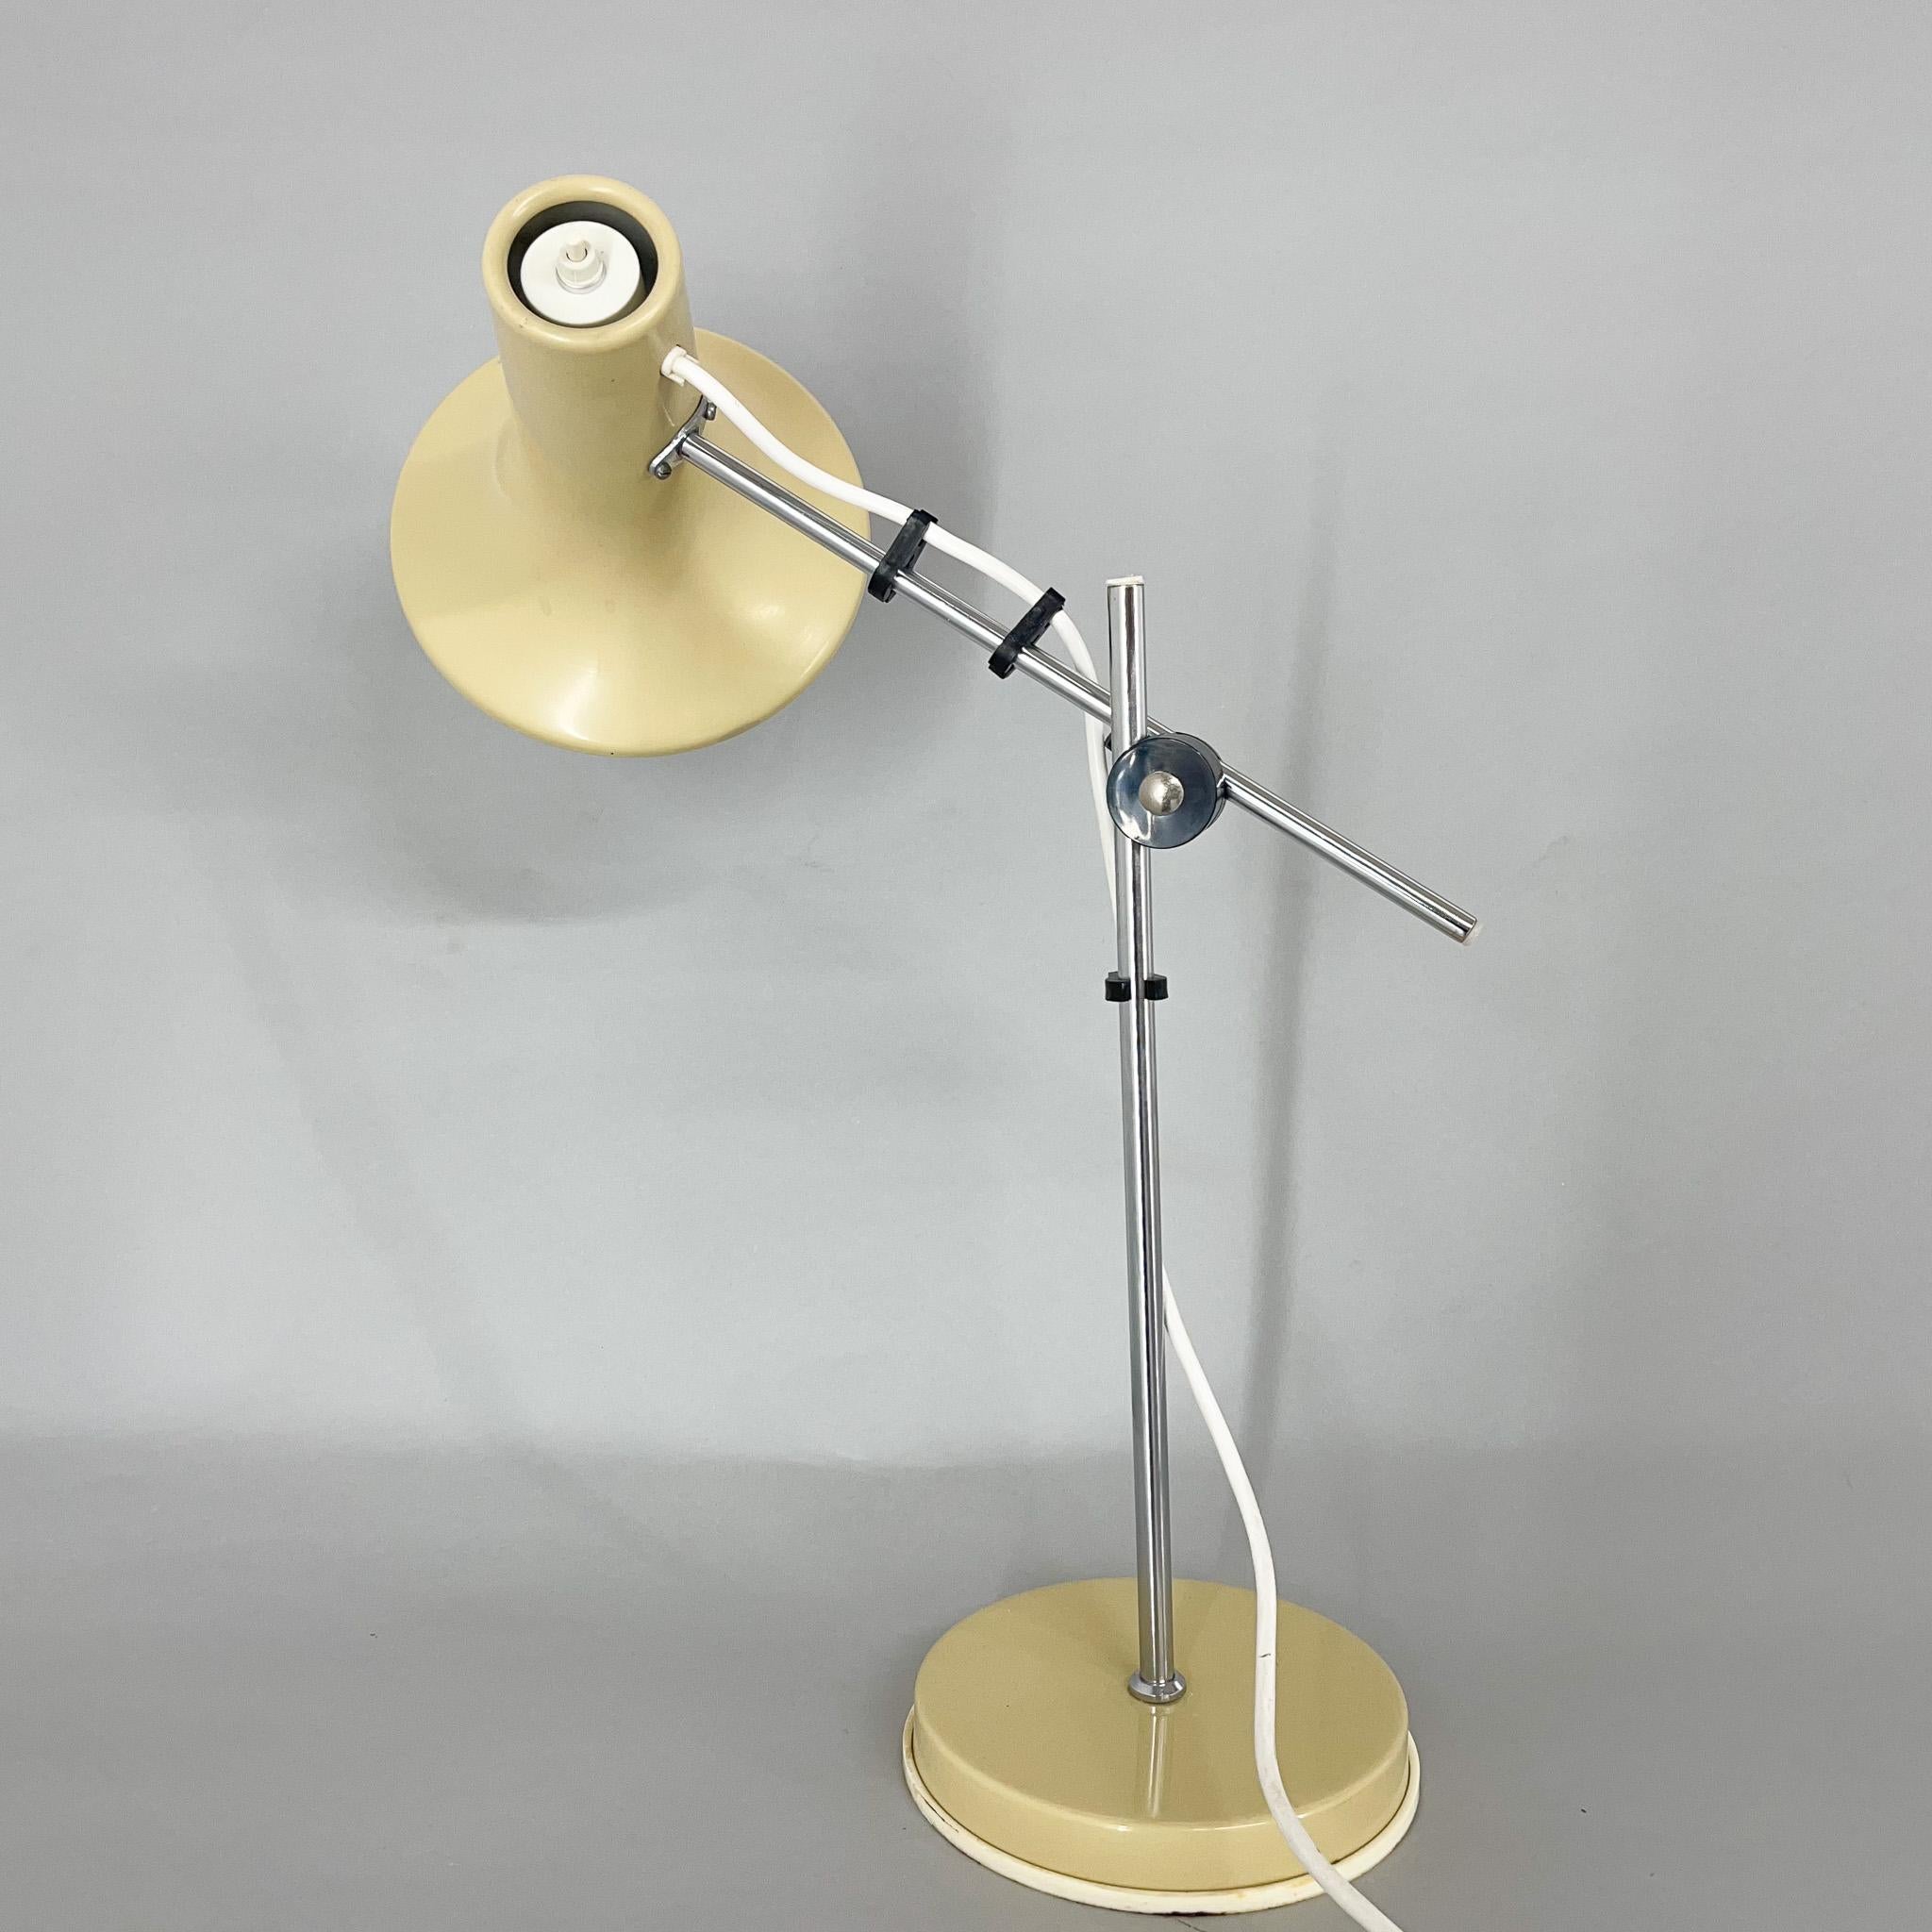 Hungarian 1970s Adjustable Metal Table Lamp in Creamy Color, Hungary For Sale